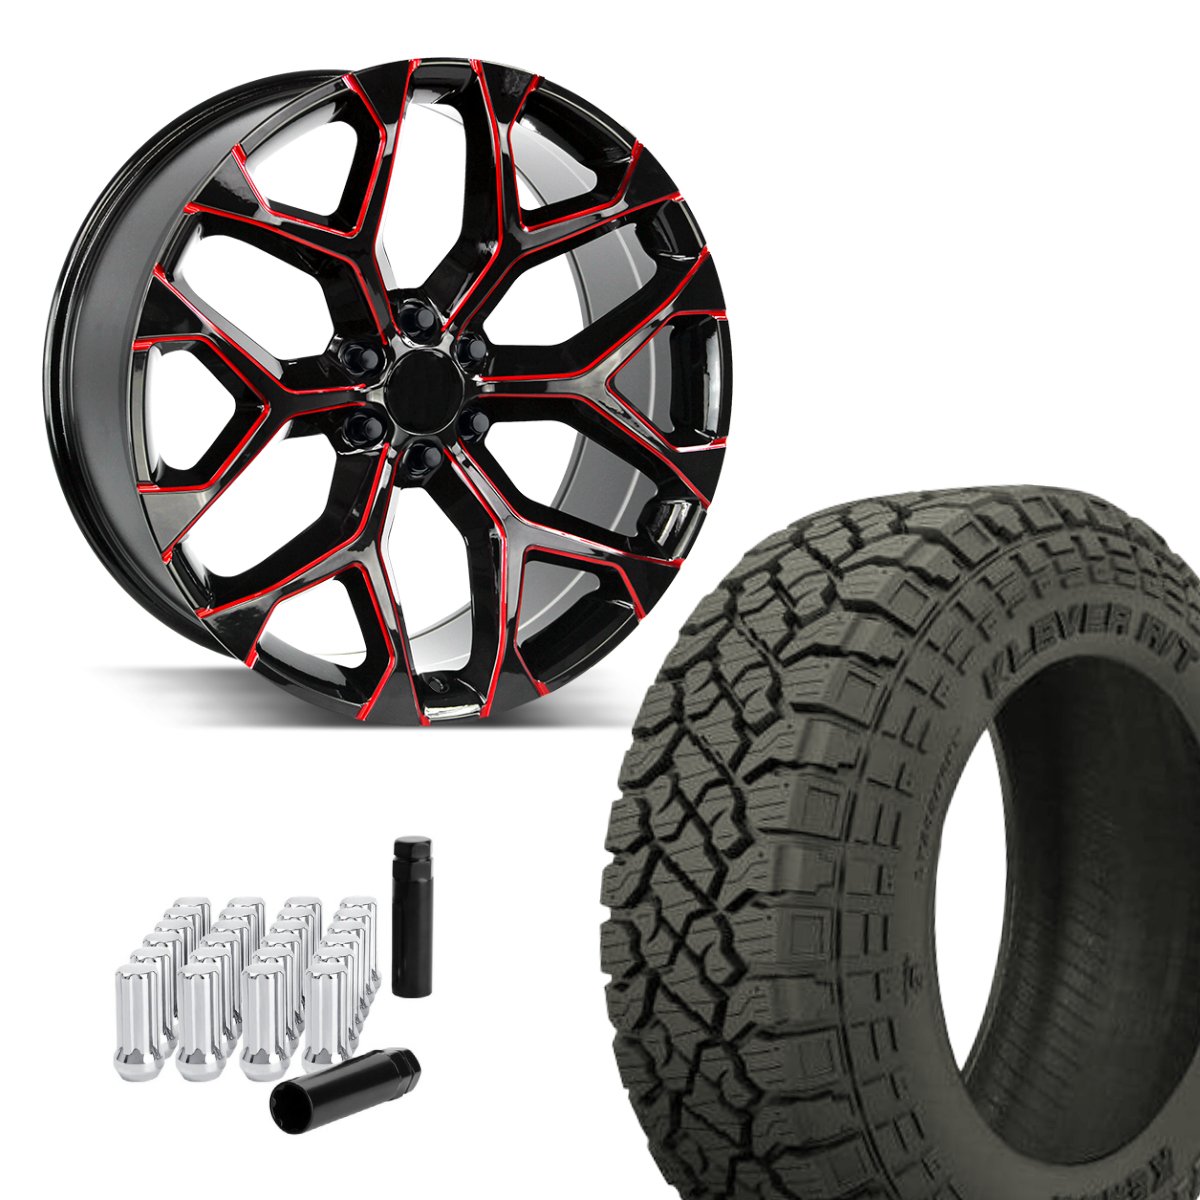 Strada Replica SnowFlake 24x10 +31 6x139.7 (6x5.5) Gloss Black Candy Red | 33x12.50R24 TOYOTA W/LEVELING KIT - Tires and Engine Performance